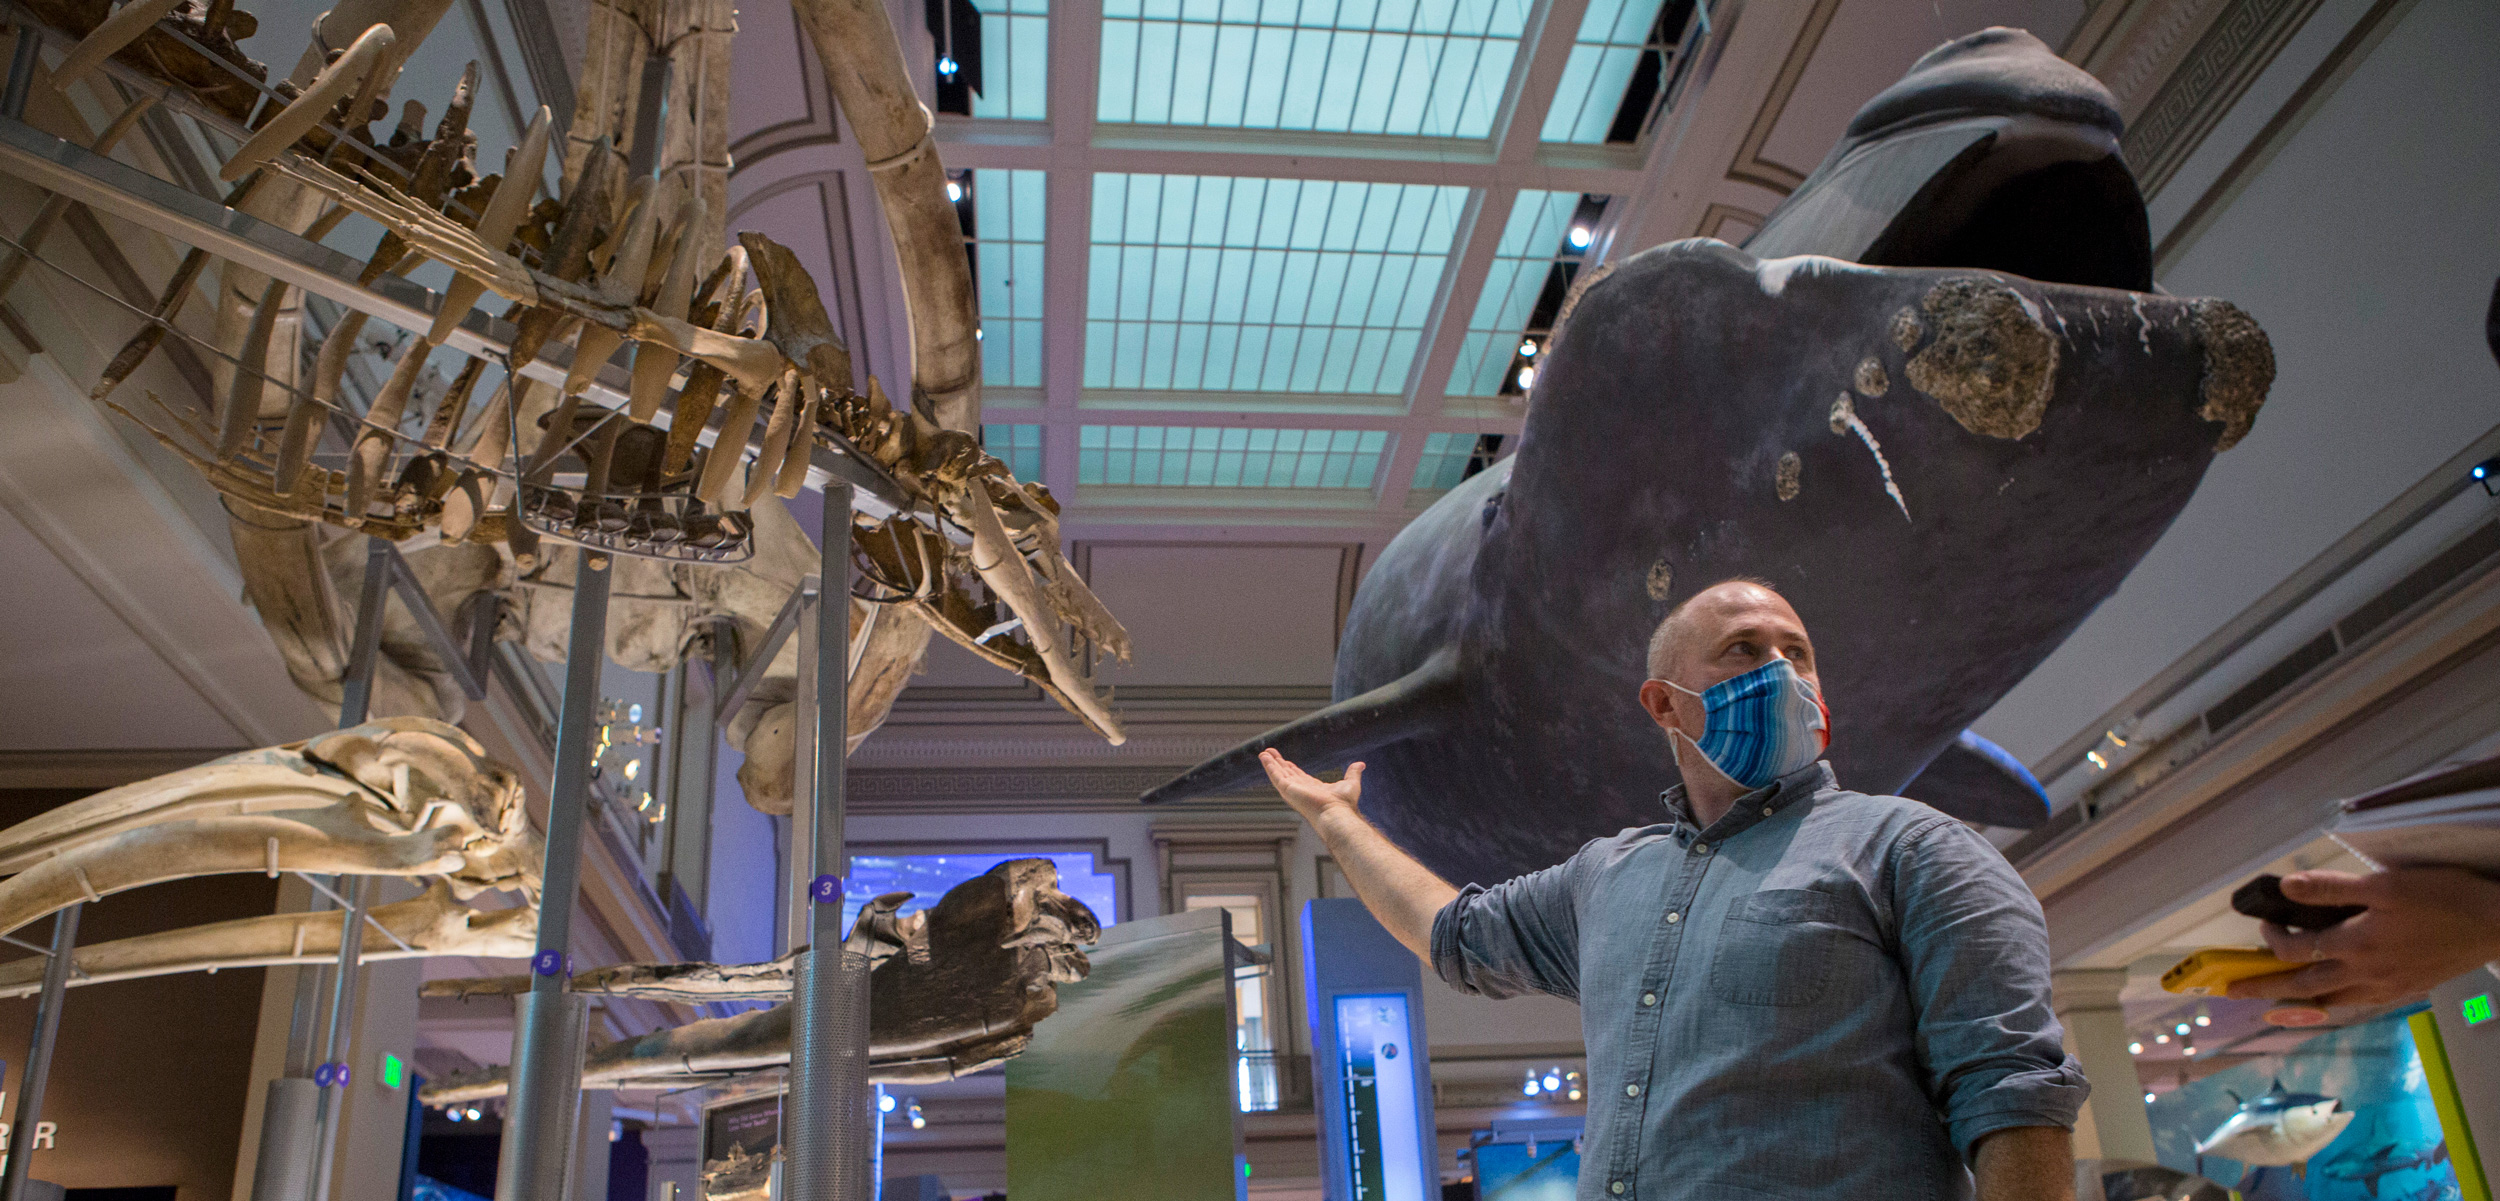 North Atlantic right whale displayed at the National Museum of Natural History in Washington, D.C.